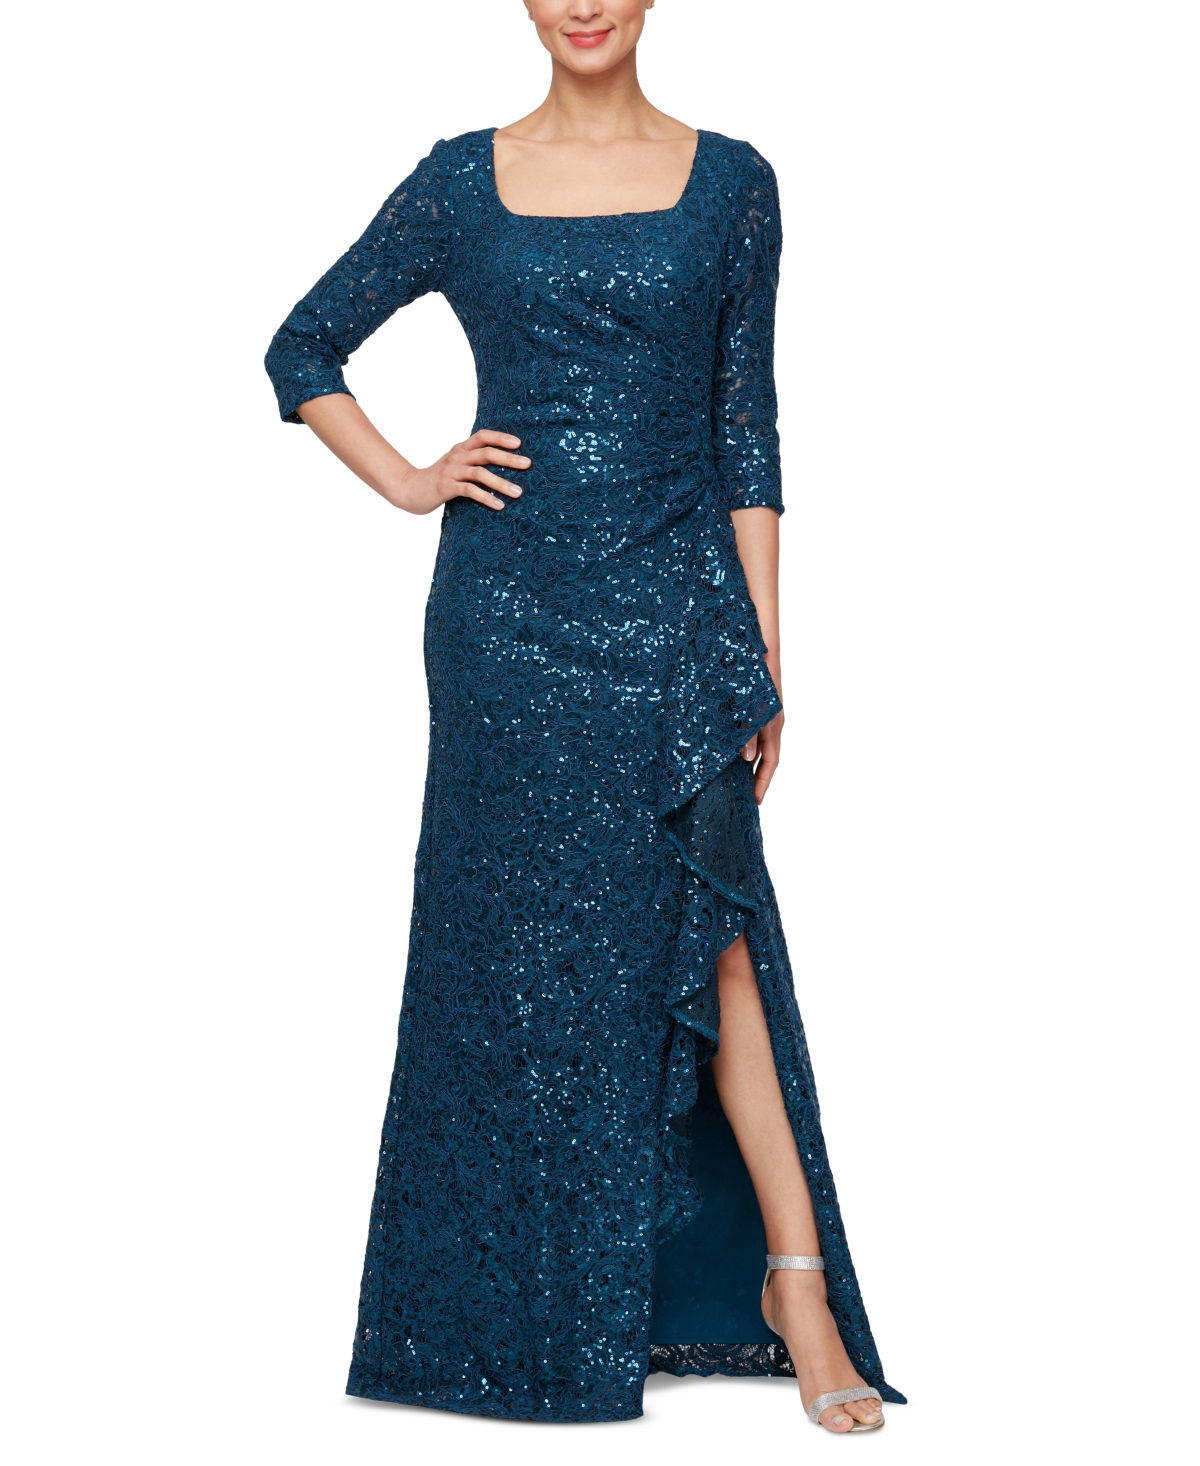 Women's Sequin Lace 3/4-Sleeve Gown - Deep Teal